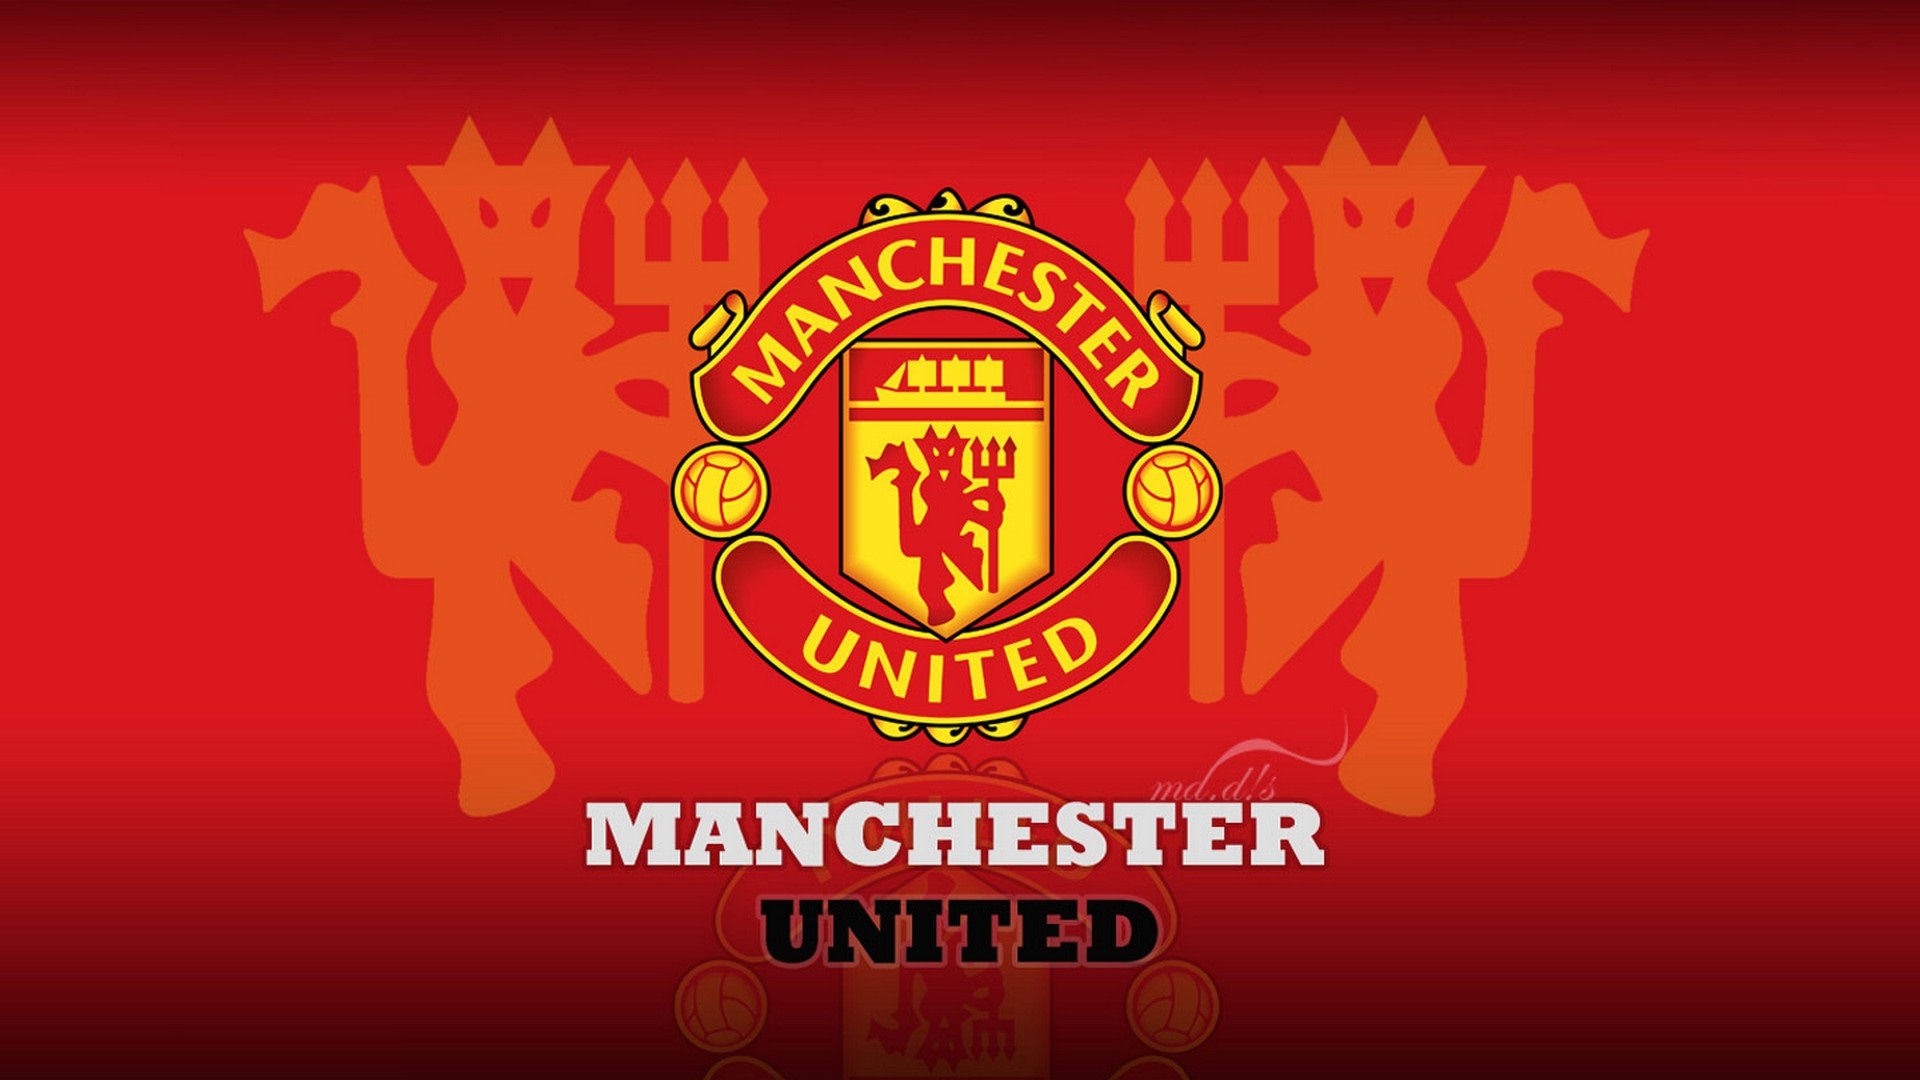 Manchester United Wallpaper HD With high-resolution 1920X1080 pixel. You can use this wallpaper for your Desktop Computers, Mac Screensavers, Windows Backgrounds, iPhone Wallpapers, Tablet or Android Lock screen and another Mobile device